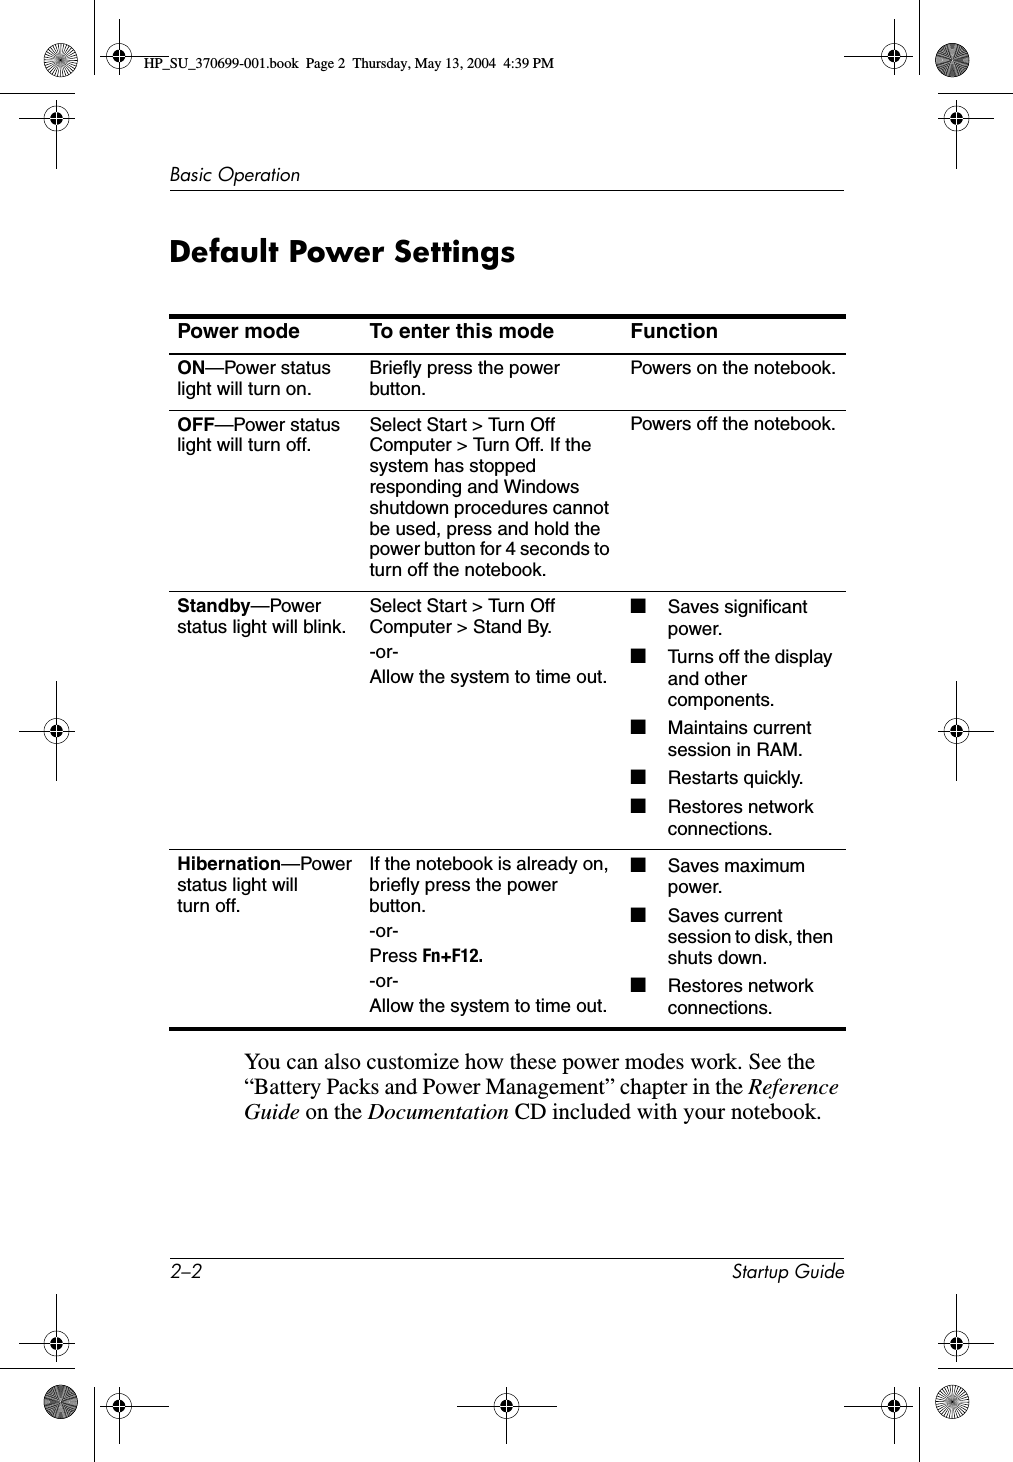 2–2 Startup GuideBasic OperationDefault Power SettingsYou can also customize how these power modes work. See the “Battery Packs and Power Management” chapter in the Reference Guide on the Documentation CD included with your notebook.Power mode To enter this mode FunctionON—Power status light will turn on. Briefly press the power button. Powers on the notebook.OFF—Power status light will turn off. Select Start &gt; Turn Off Computer &gt; Turn Off. If the system has stopped responding and Windows shutdown procedures cannot be used, press and hold the power button for 4 seconds to turn off the notebook.Powers off the notebook.Standby—Power status light will blink. Select Start &gt; Turn Off Computer &gt; Stand By.-or-Allow the system to time out. ■Saves significant power.■Turns off the display and other components.■Maintains current session in RAM.■Restarts quickly.■Restores network connections.Hibernation—Power status light will turn off.If the notebook is already on, briefly press the power button.-or-Press Fn+F12. -or-Allow the system to time out.■Saves maximum power.■Saves current session to disk, then shuts down.■Restores network connections.HP_SU_370699-001.book  Page 2  Thursday, May 13, 2004  4:39 PM